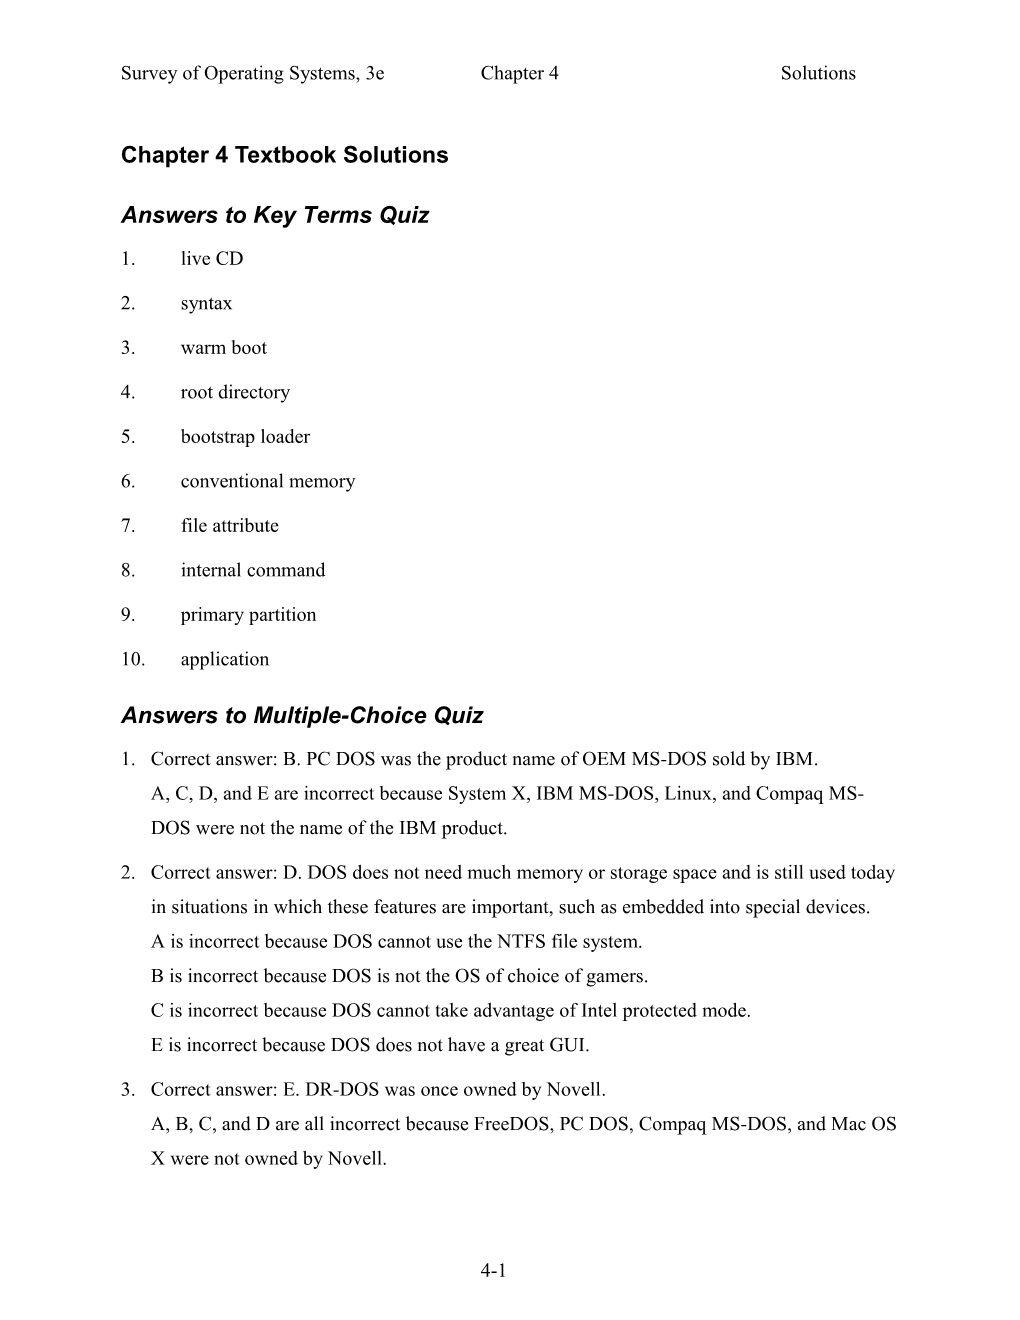 Answers to Key Terms Quiz